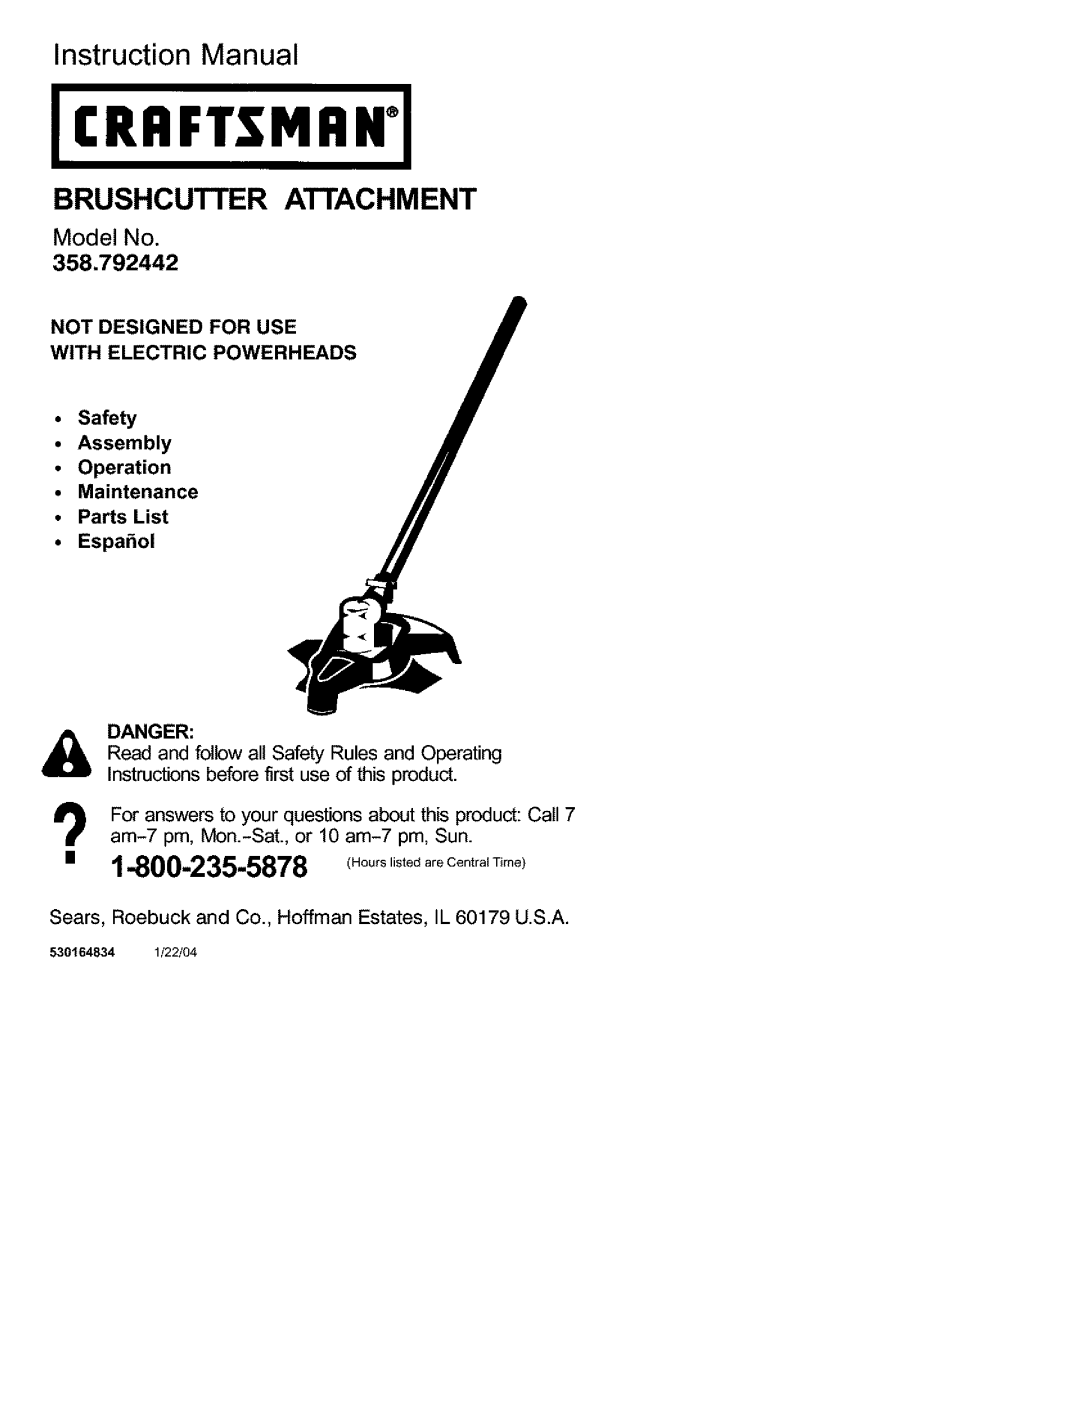 Craftsman 358.792442 instruction manual Brushcutter Attachment, Model No, Not Designed For Use With Electric Powerheads 